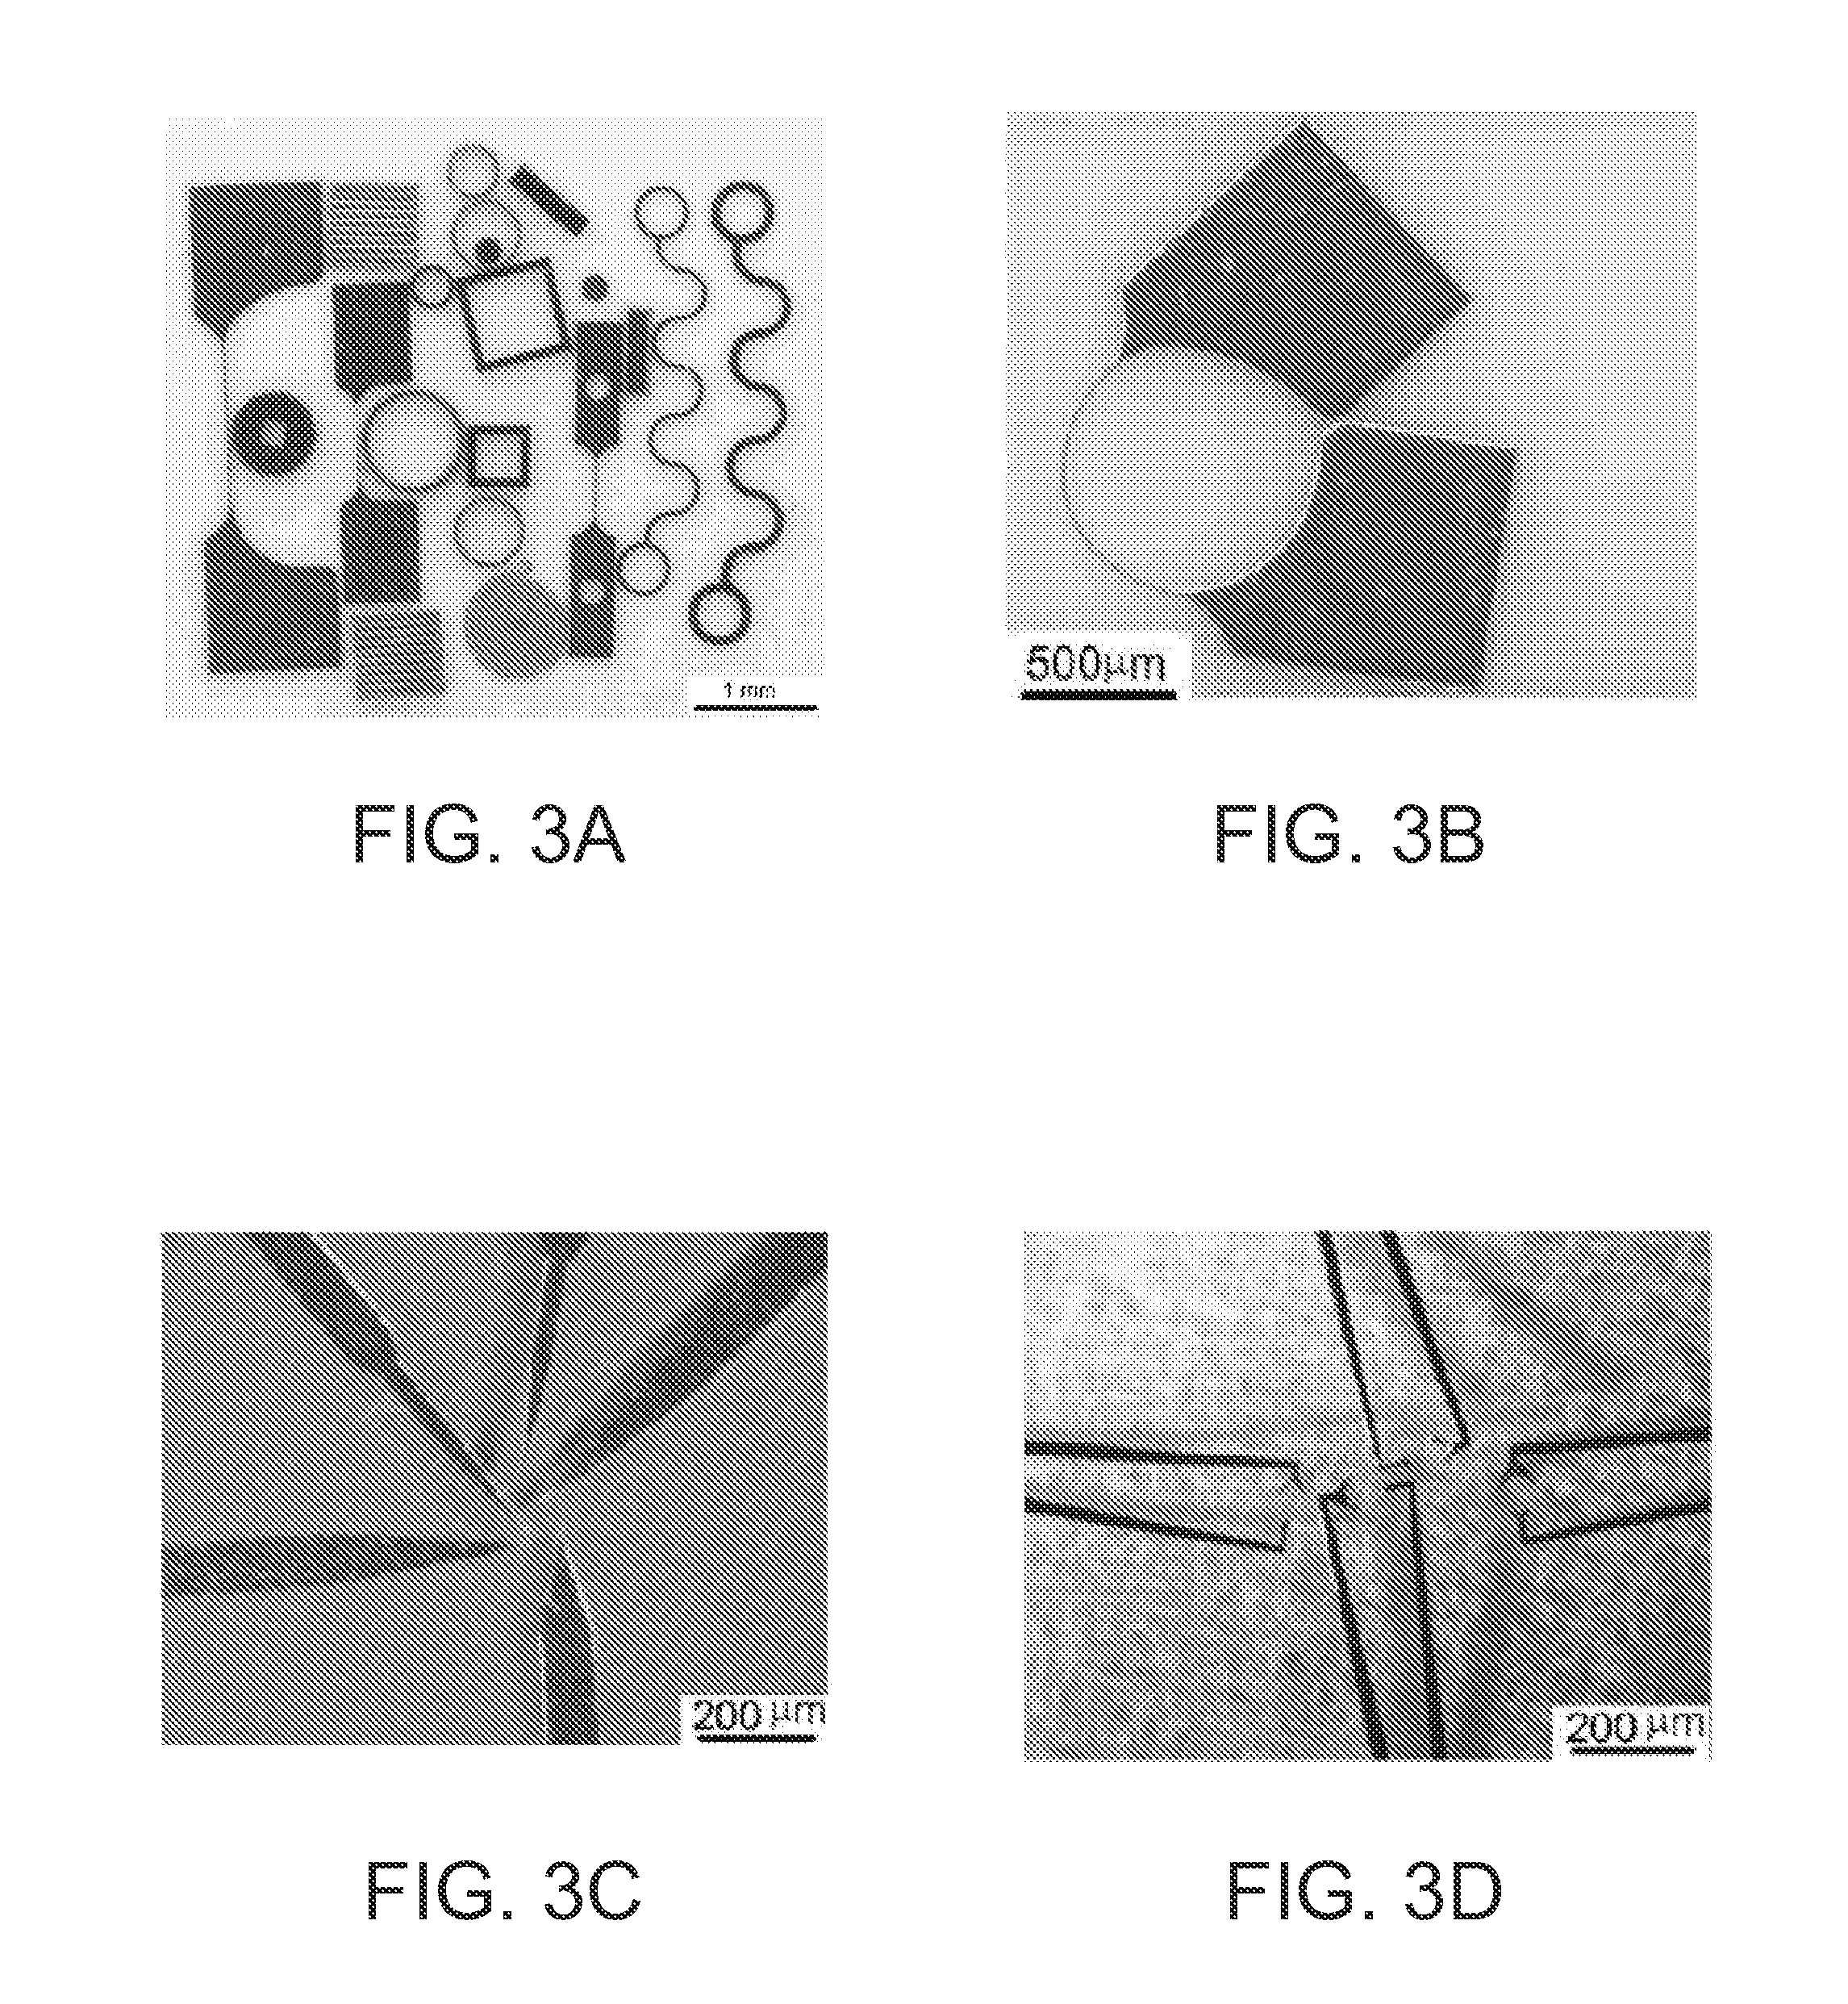 Systems and methods for implementing bulk metallic glass-based macroscale compliant mechanisms